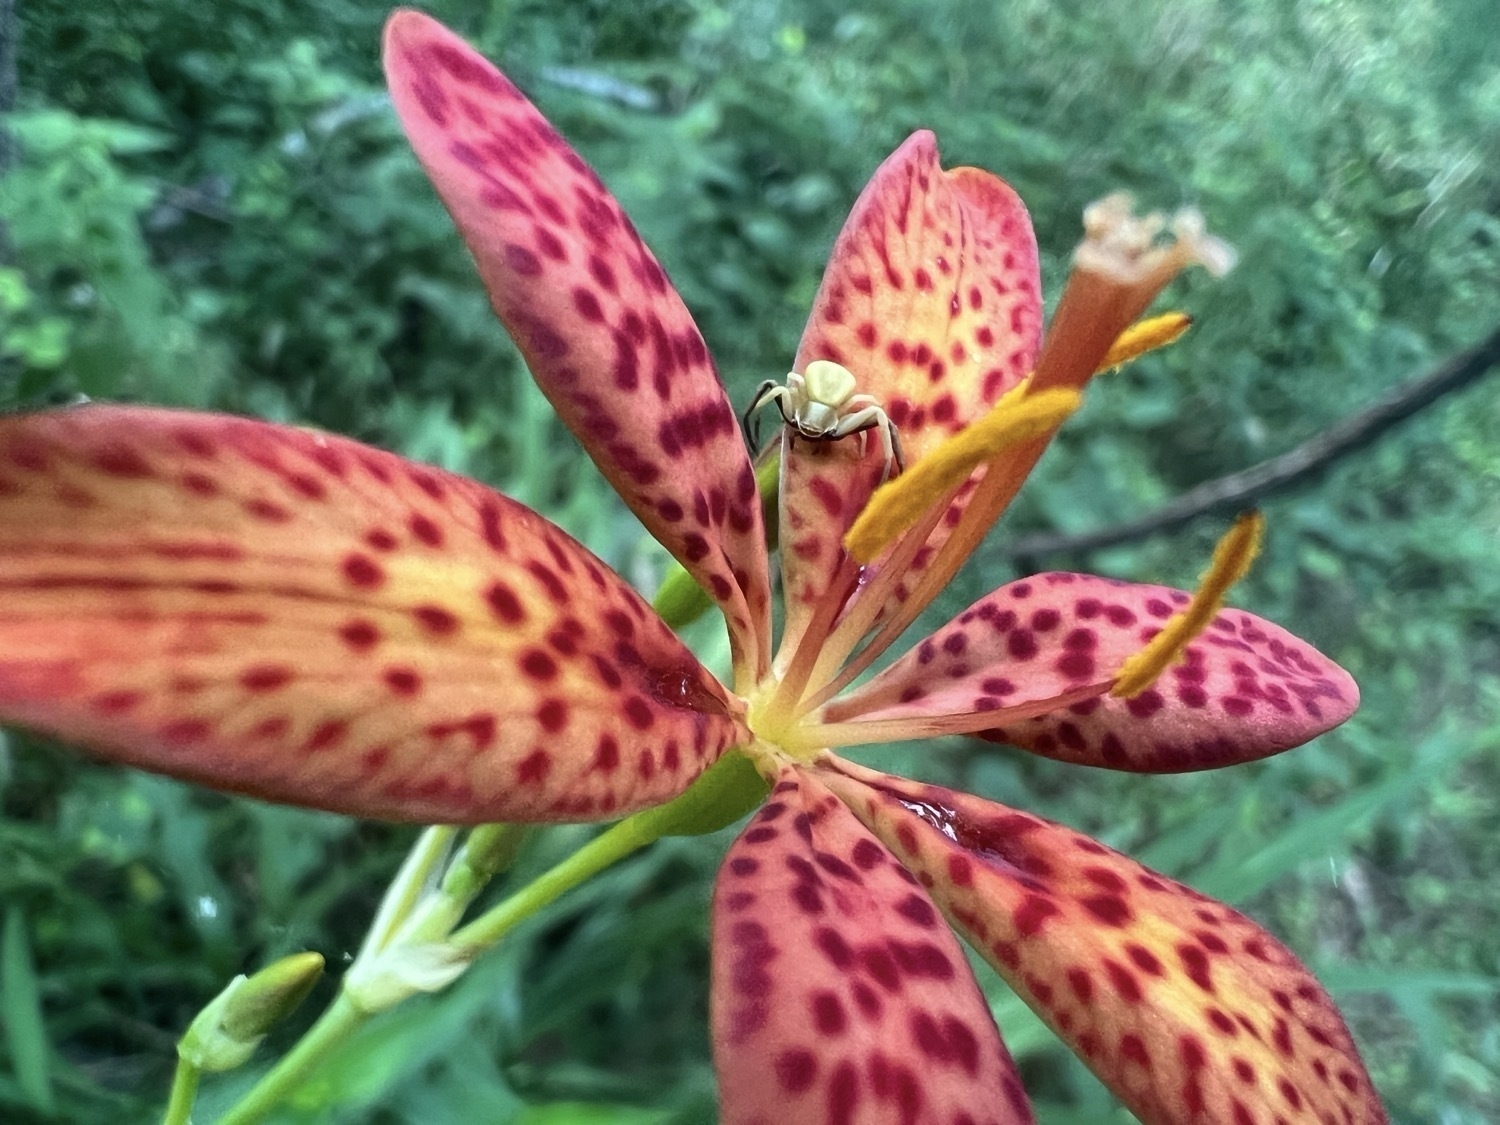 A peach colored flower with dark red spots covering its six elongated petals. There are three pollen covered yellow anthers rising from the center of the flower. The background is blurred dark green forest. A tiny pale yellow spider is sitting on one of the petals.